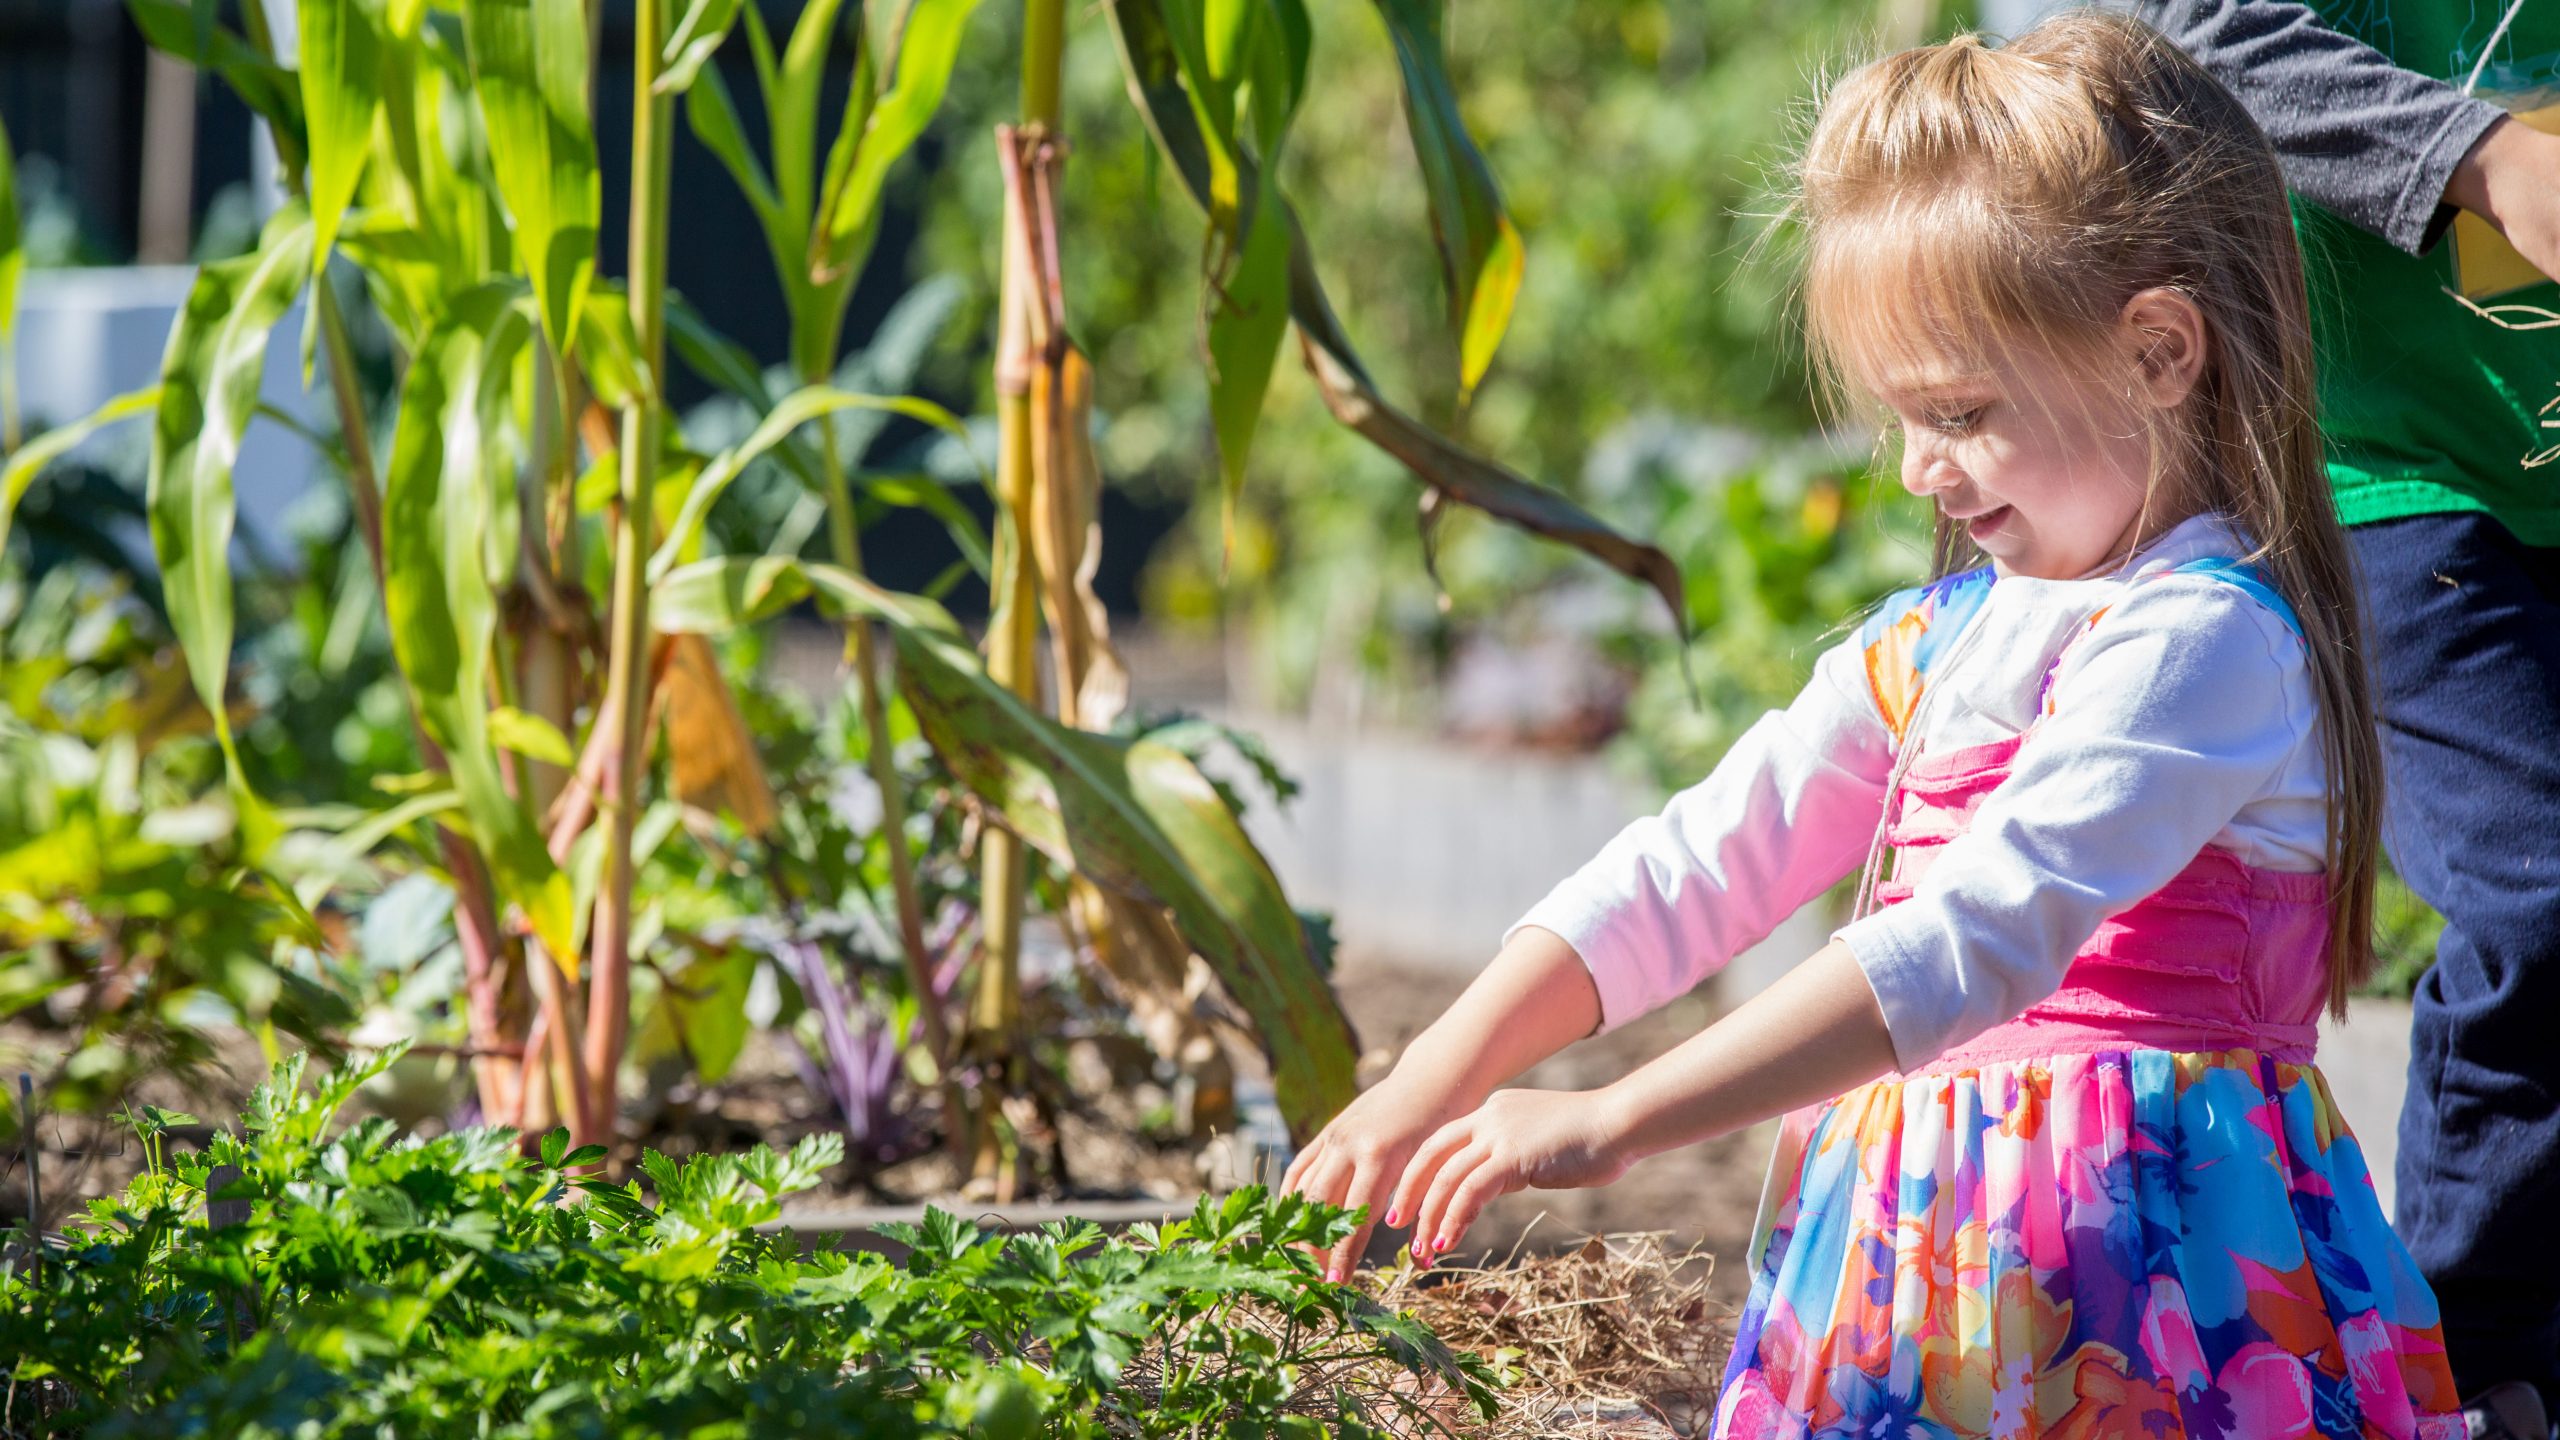 A girl in a pink dress with blue, purple, and yellow flowers digs in a vegetable garden at the Edible Academy.